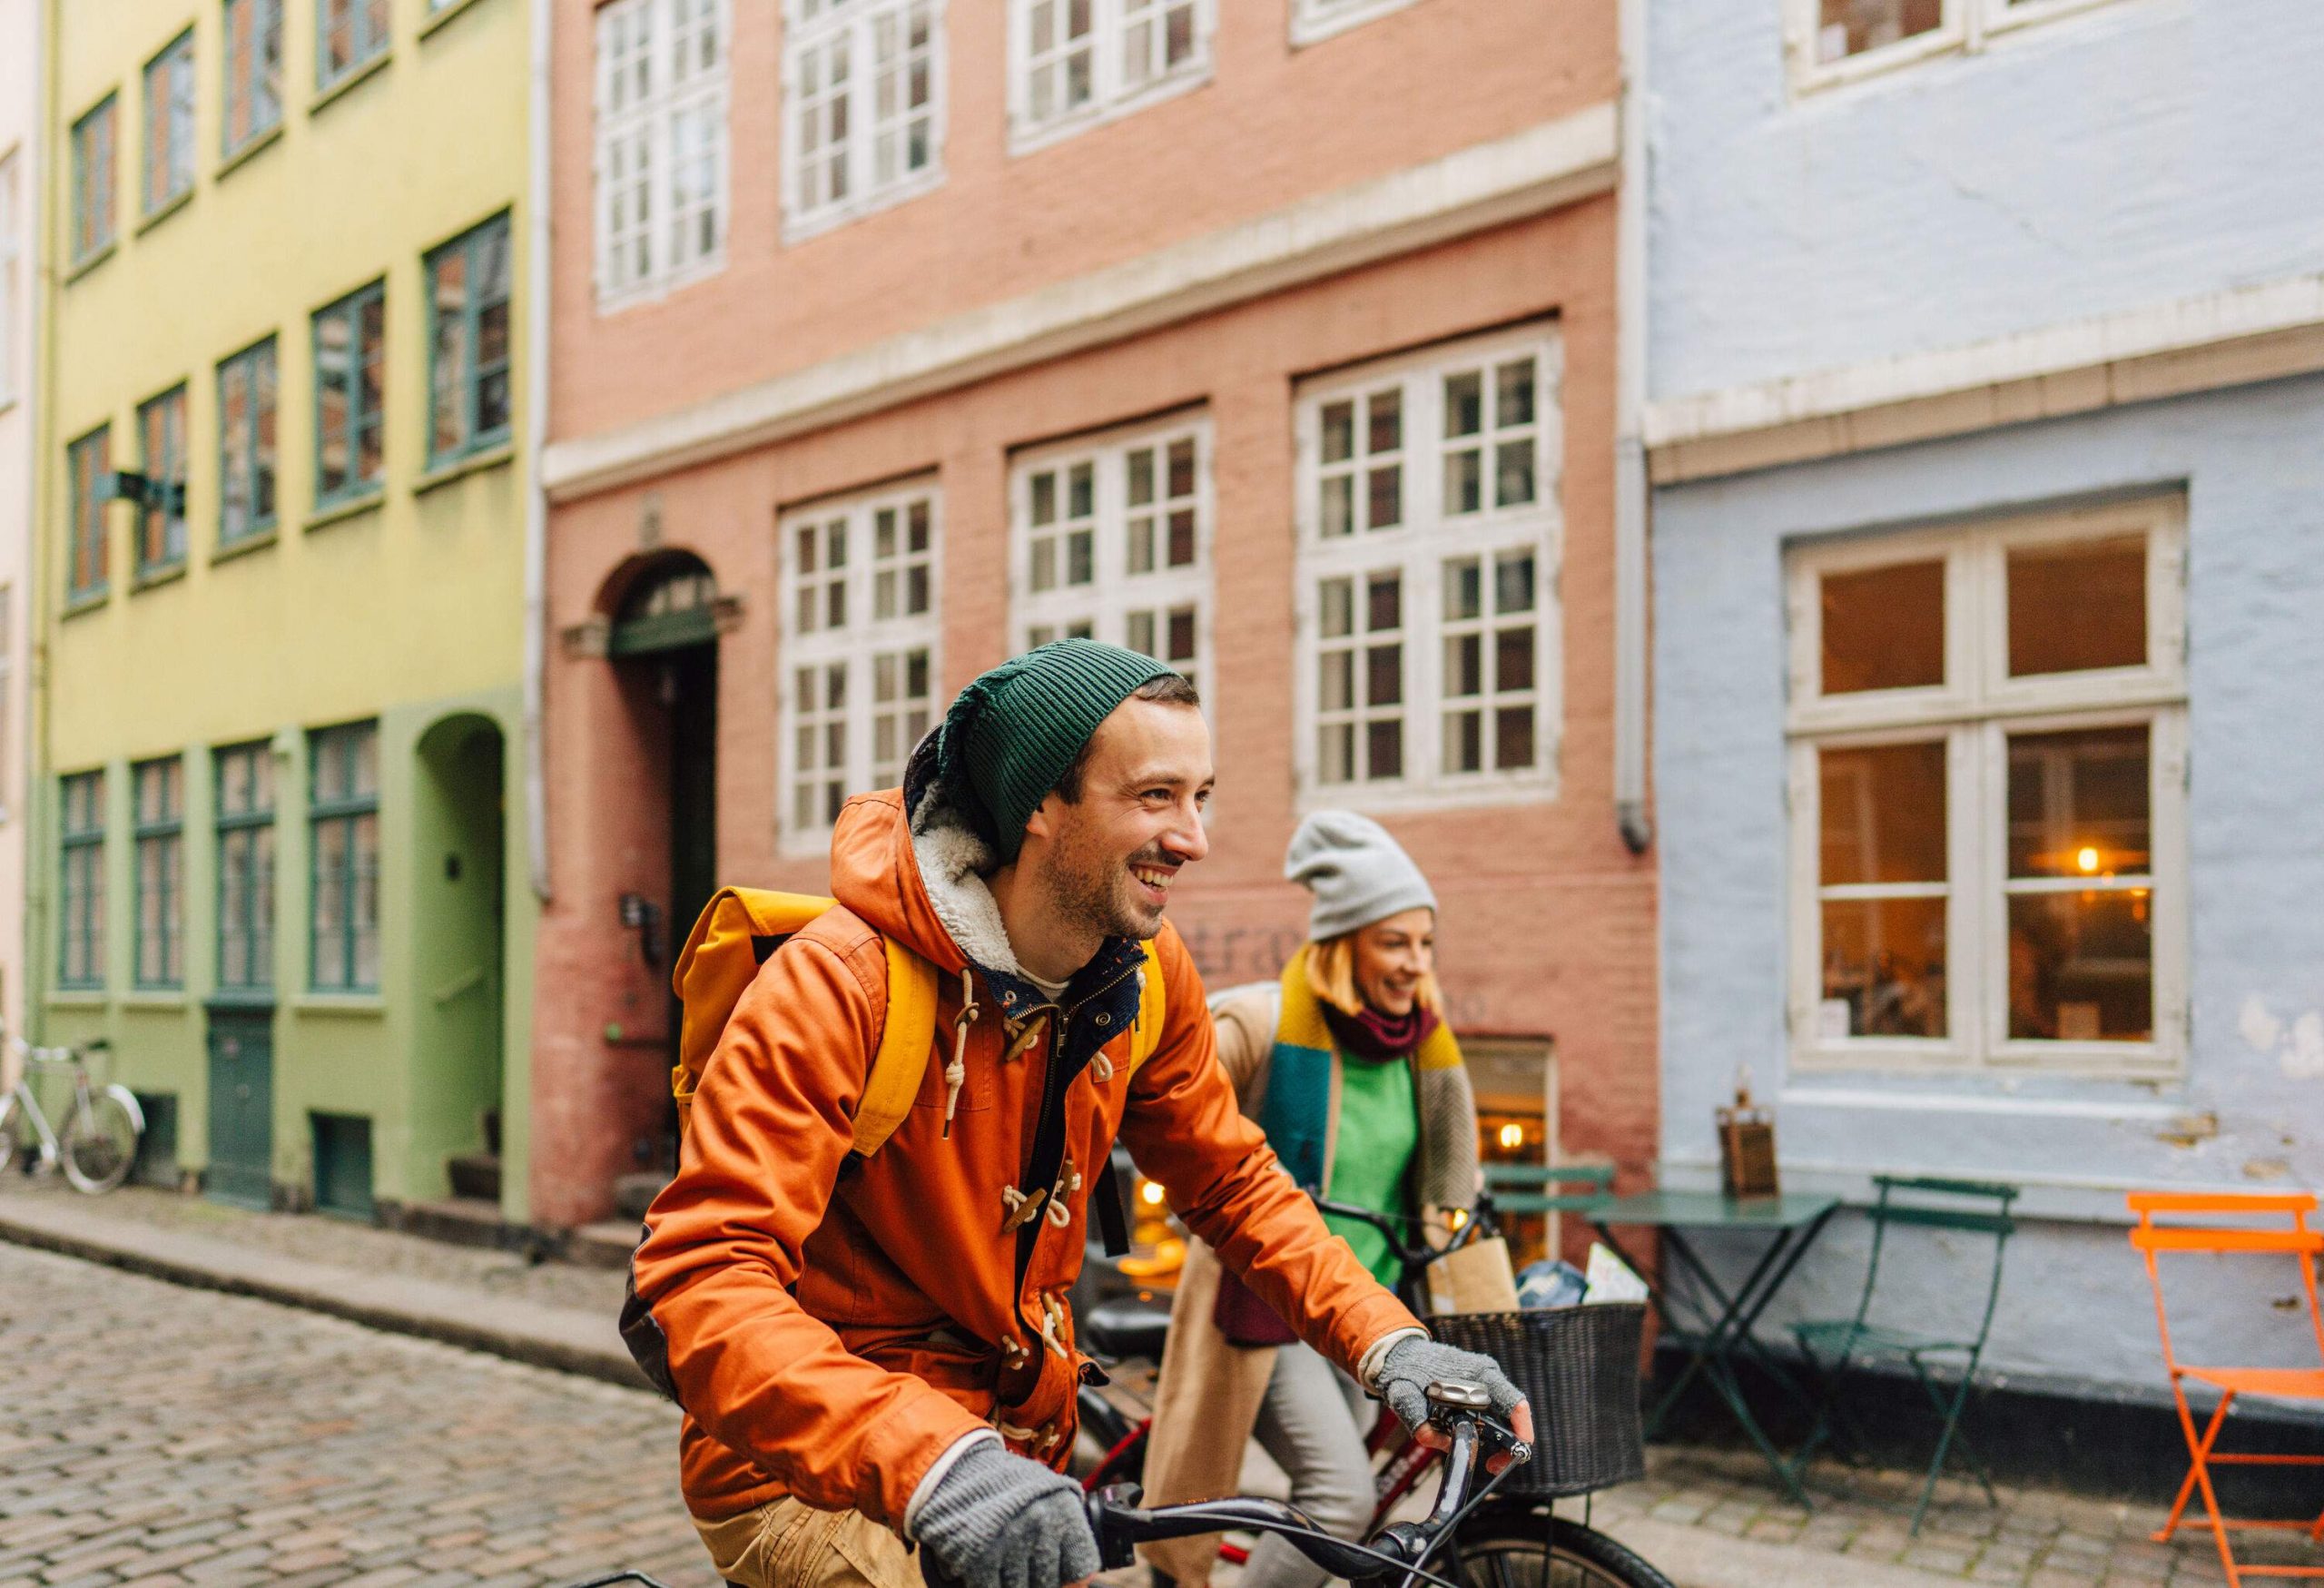 Tourists joyfully ride bicycles along a charming brick street with a picturesque backdrop of colourful buildings.